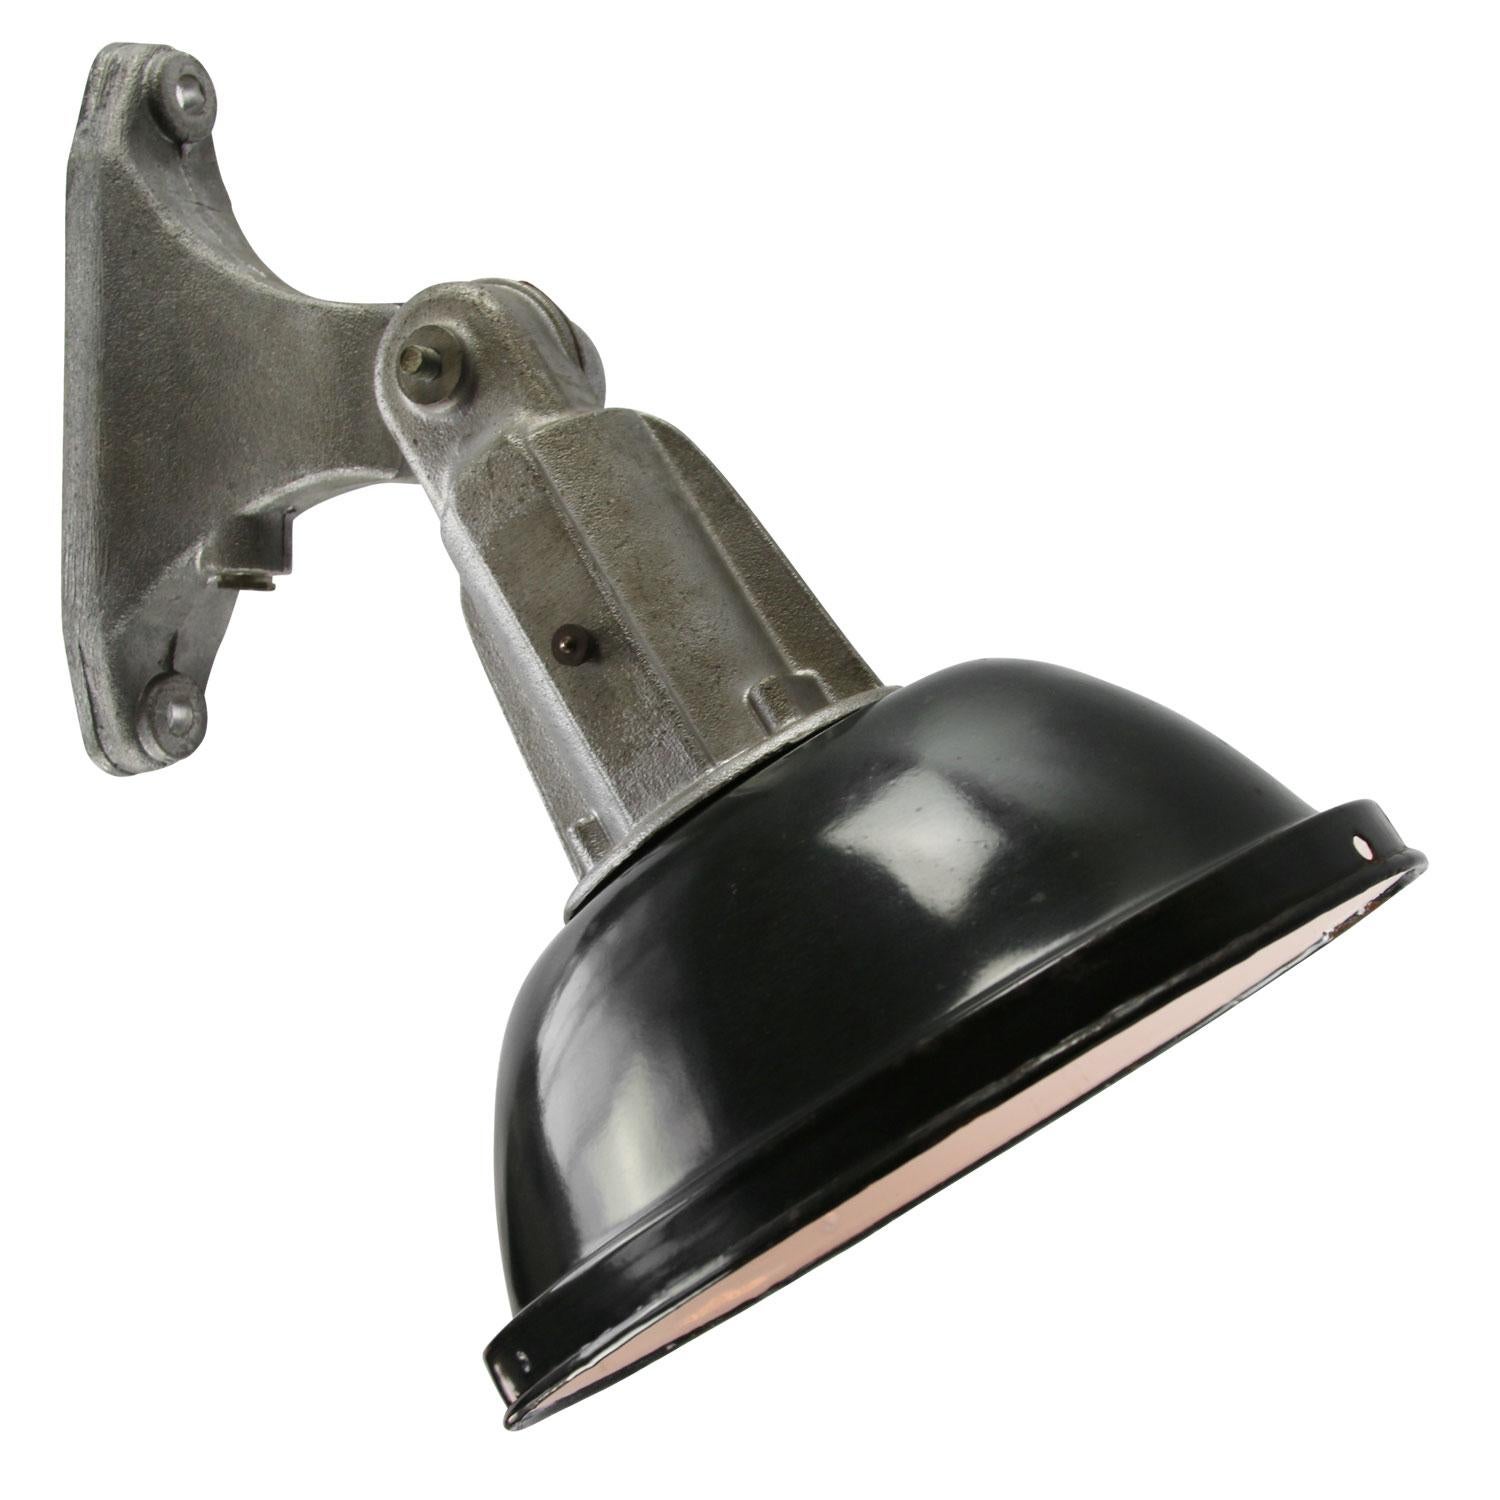 Vintage French Factory wall light
Oval black enamel shade with white interior. Cast aluminum

Weight: 2.00 kg / 4.4 lb

Priced per individual item. All lamps have been made suitable by international standards for incandescent light bulbs,